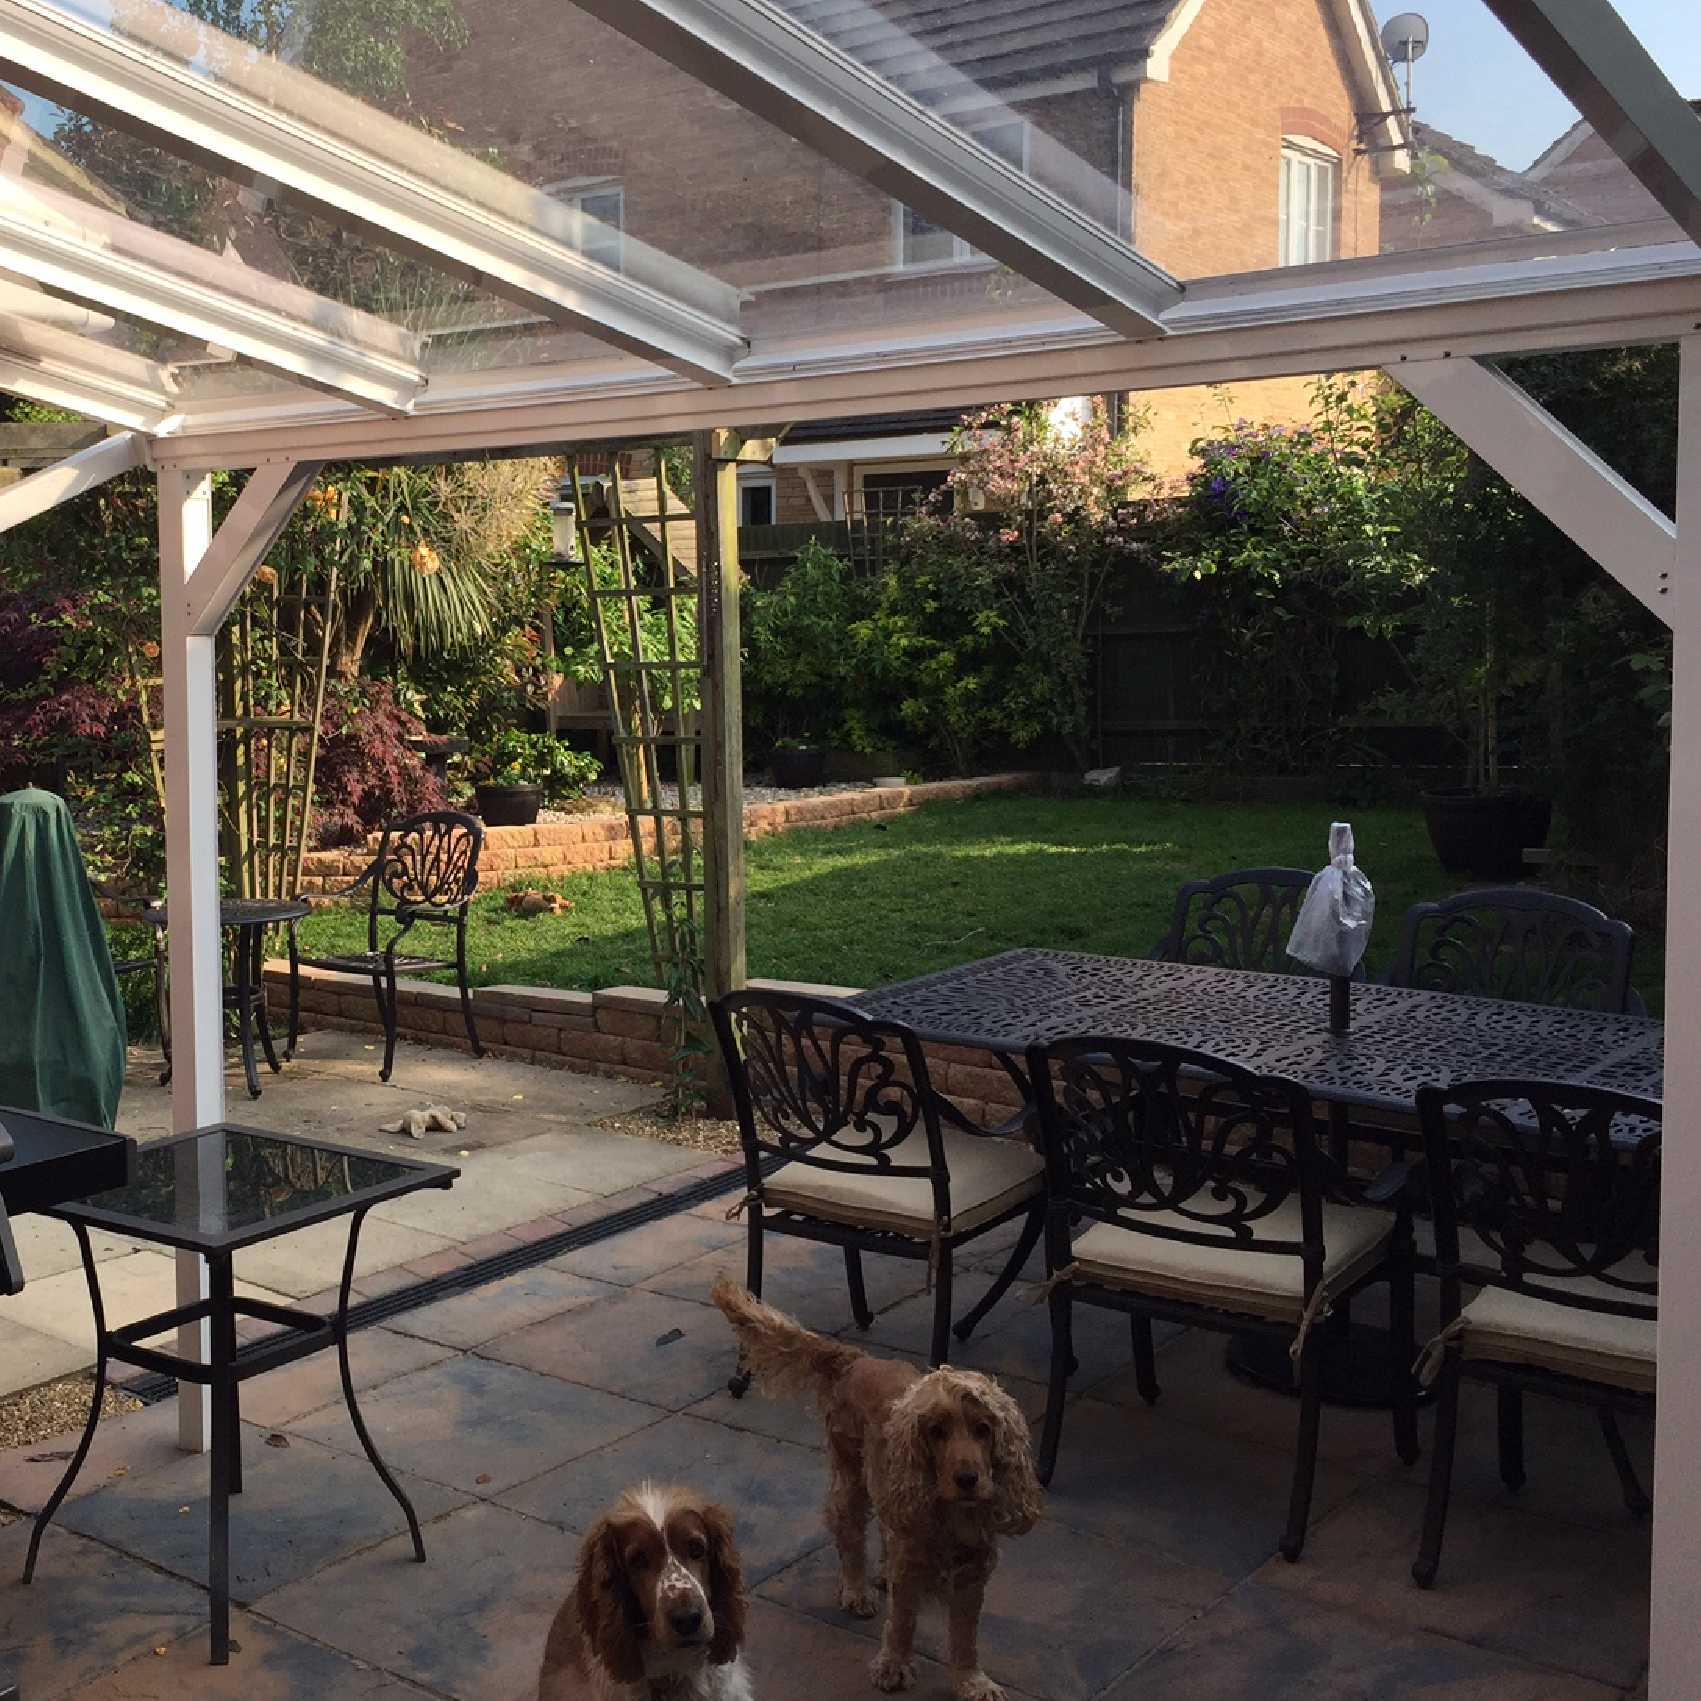 Affordable Omega Smart Lean-To Canopy, White UNGLAZED for 6mm Glazing - 2.1m (W) x 2.5m (P), (2) Supporting Posts